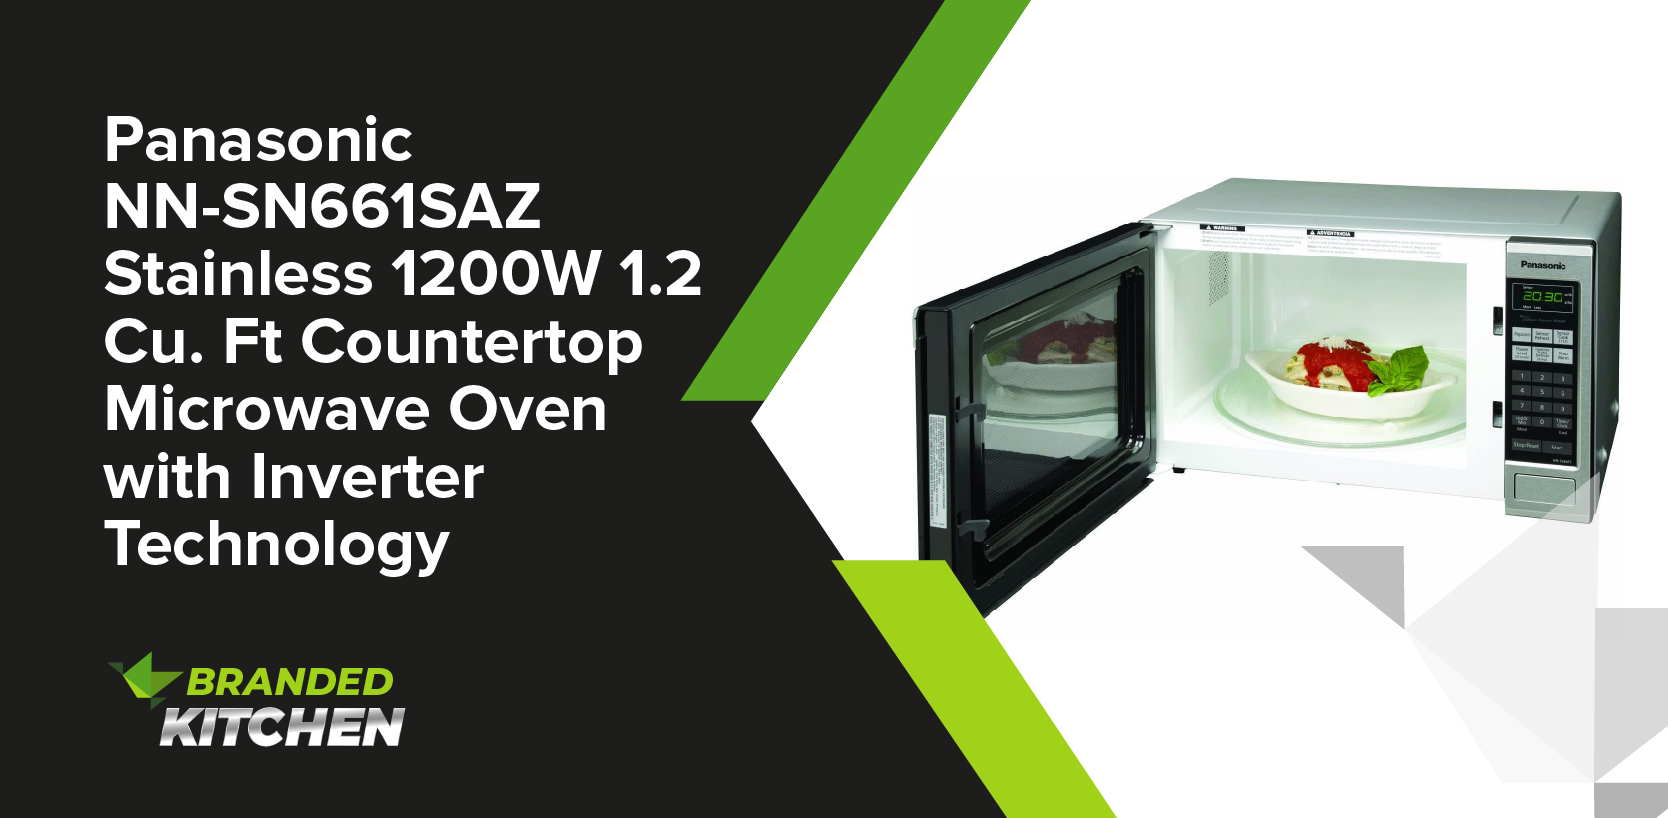 NN-SN661SAZ: The Microwave Your Kitchen Has Been Craving